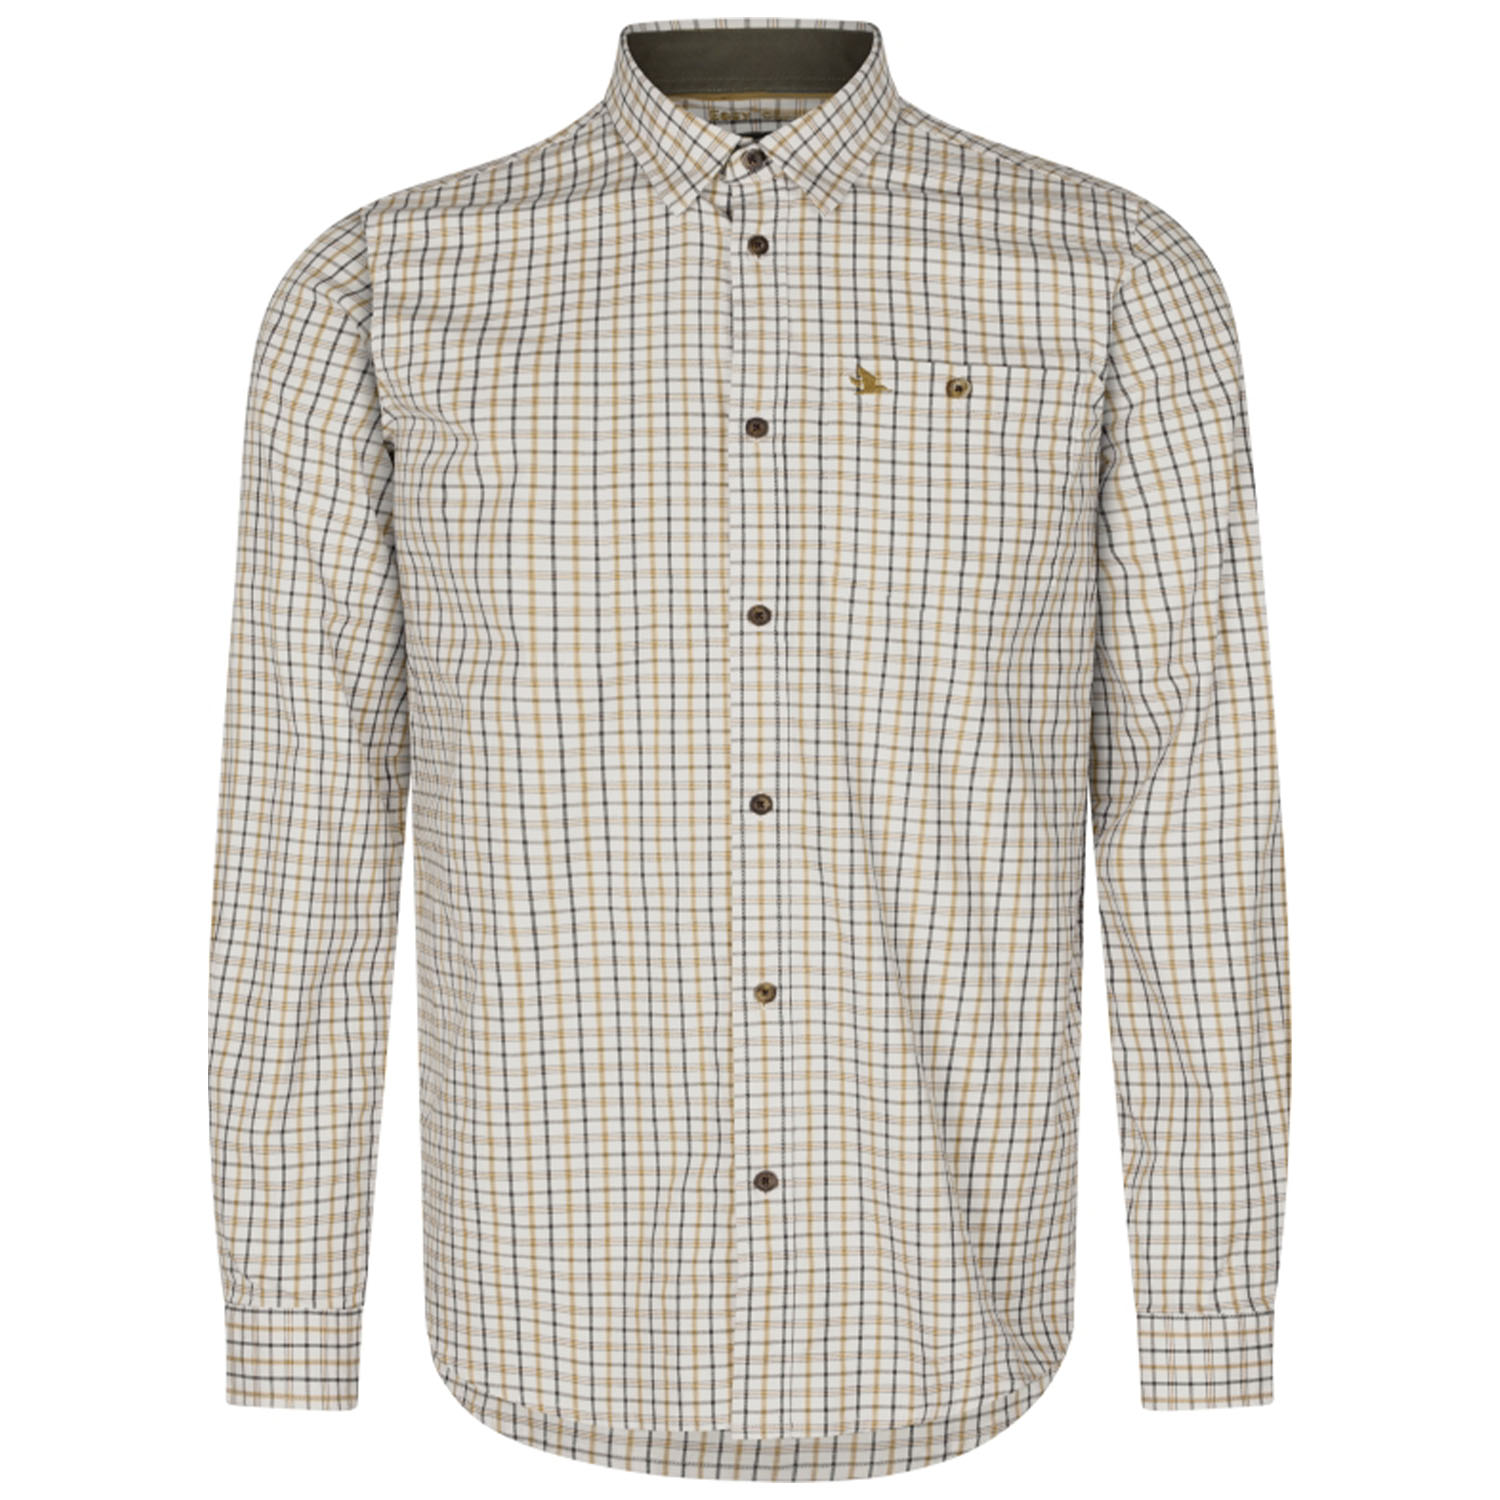 Seeland shirt oxford (Classic Blue/Classic Brown Check) - New Arrivals